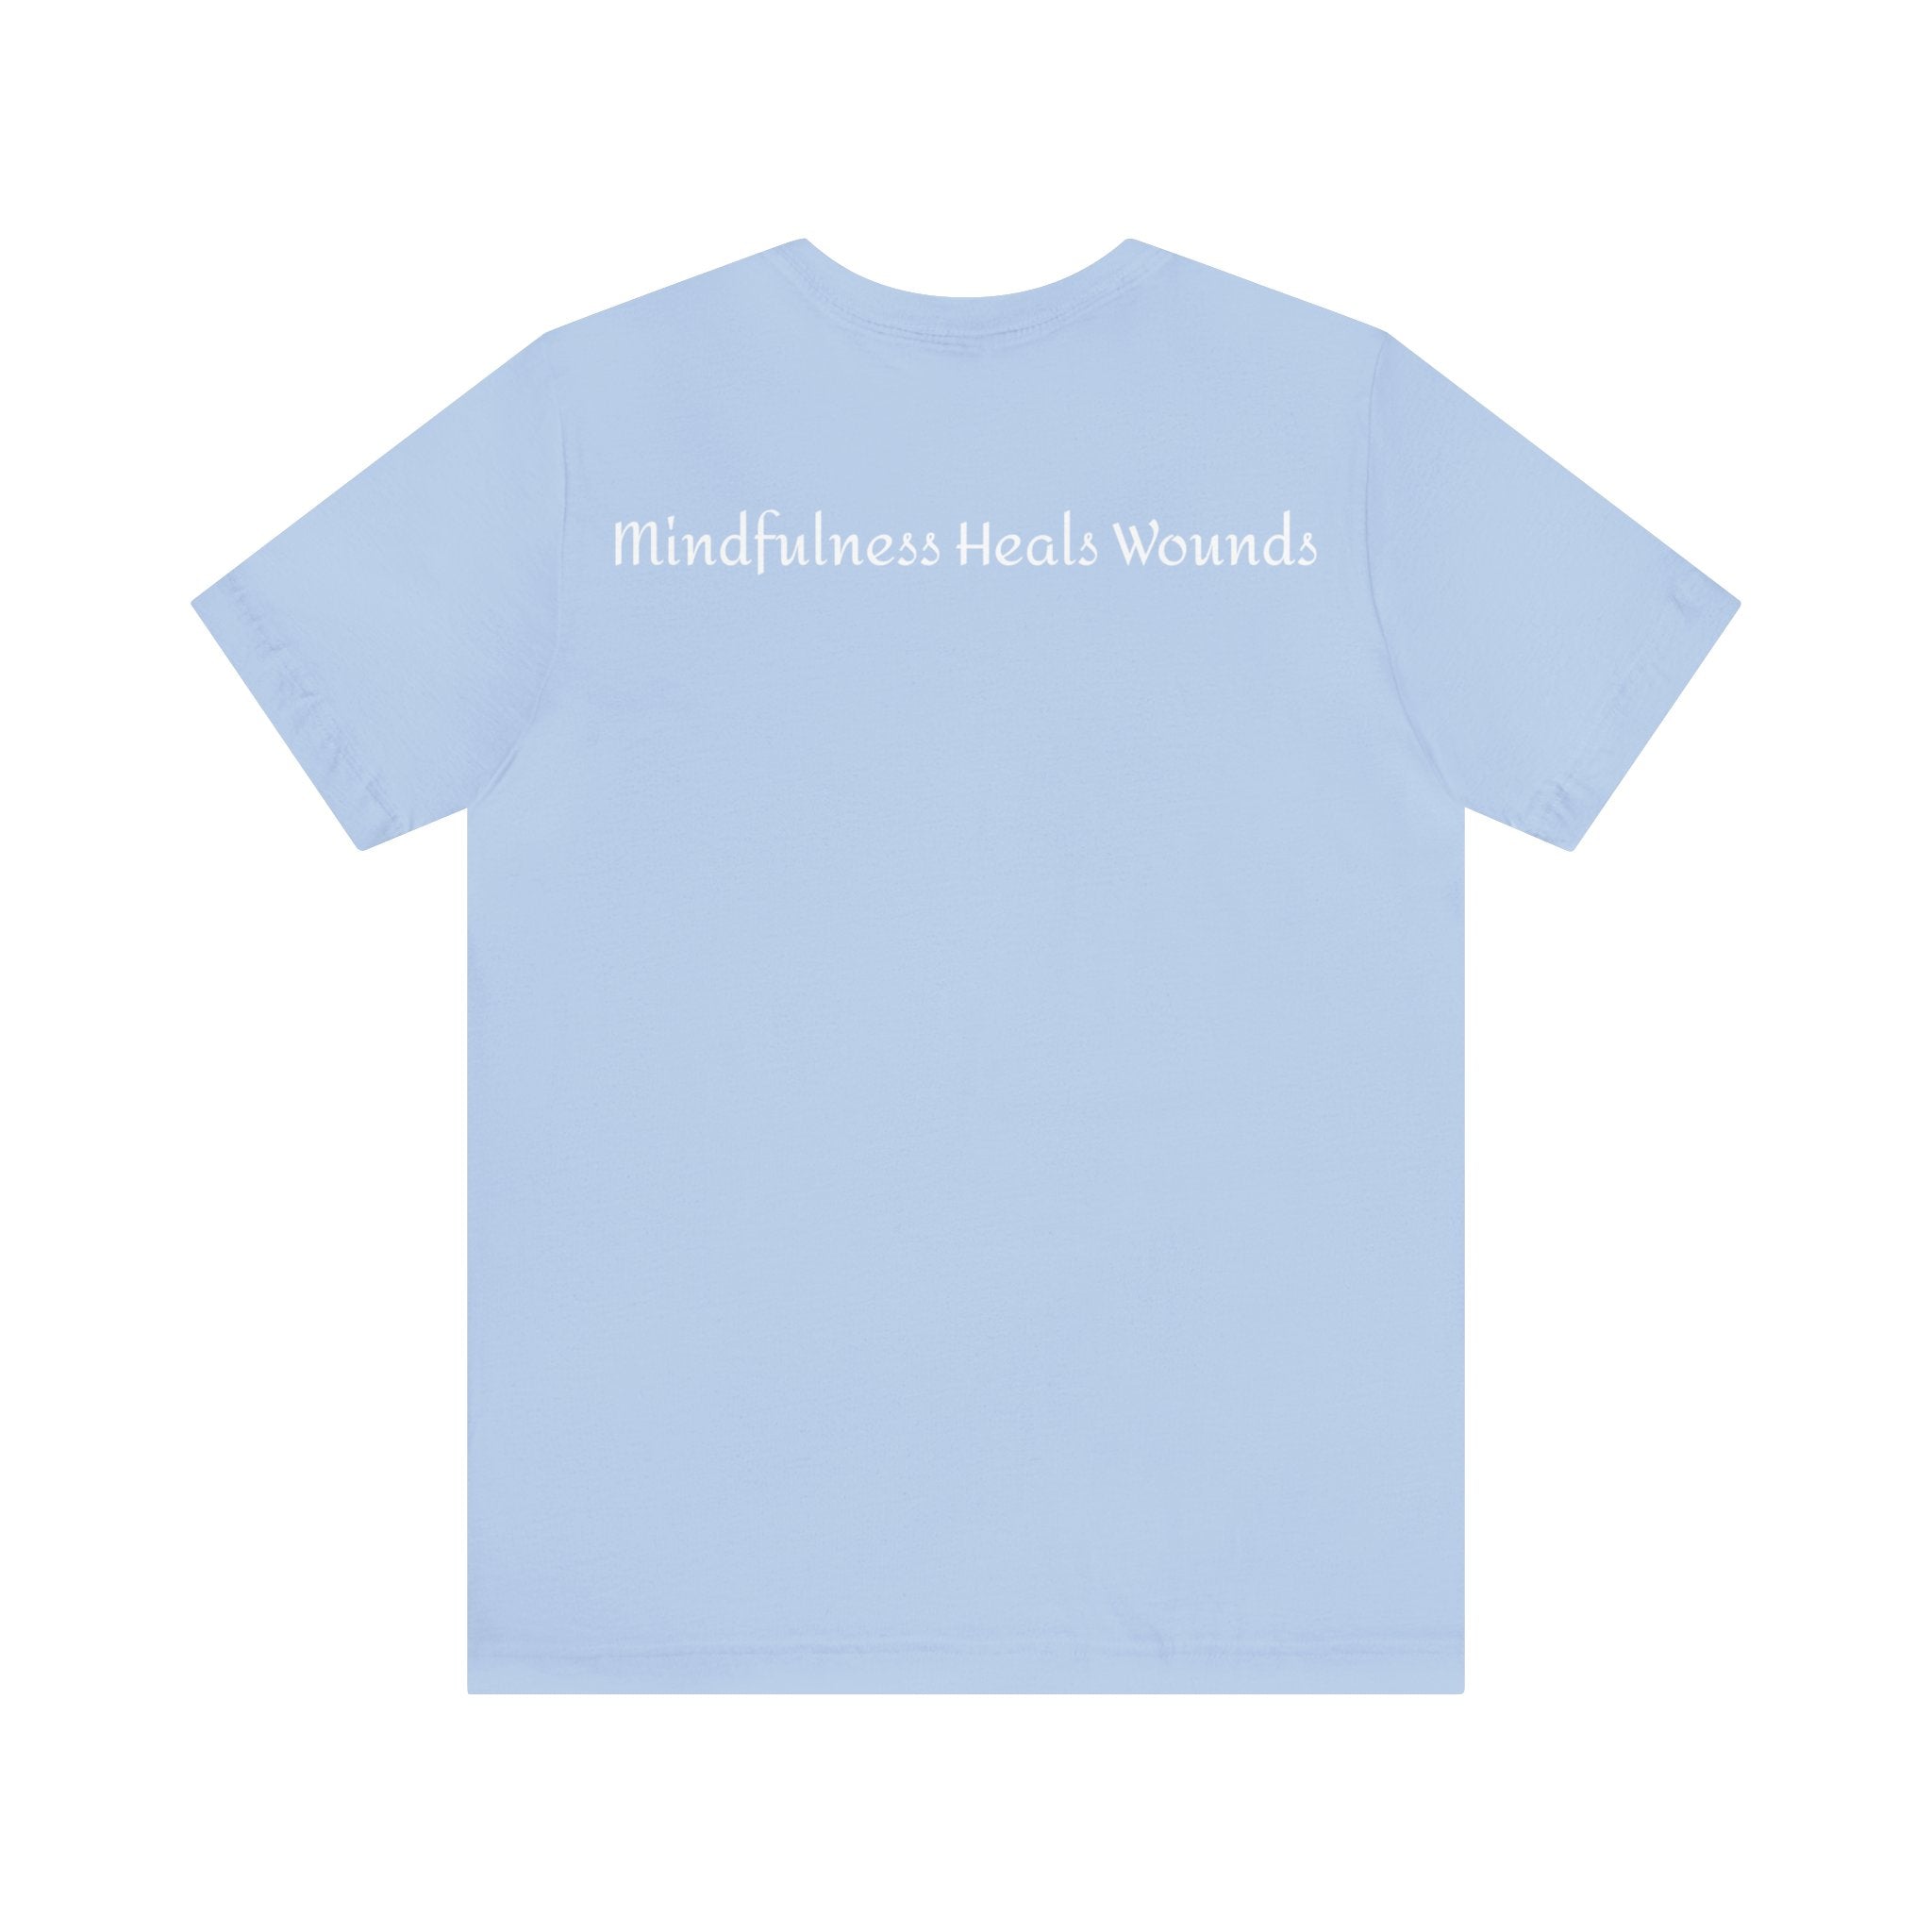 Mindfulness Heals Wounds Tee - Bella+Canvas 3001 Turquoise Airlume Cotton Bella+Canvas 3001 Crew Neckline Jersey Short Sleeve Lightweight Fabric Mental Health Support Retail Fit Tear-away Label Tee Unisex Tee T-Shirt 1856835530223316245_2048 Printify